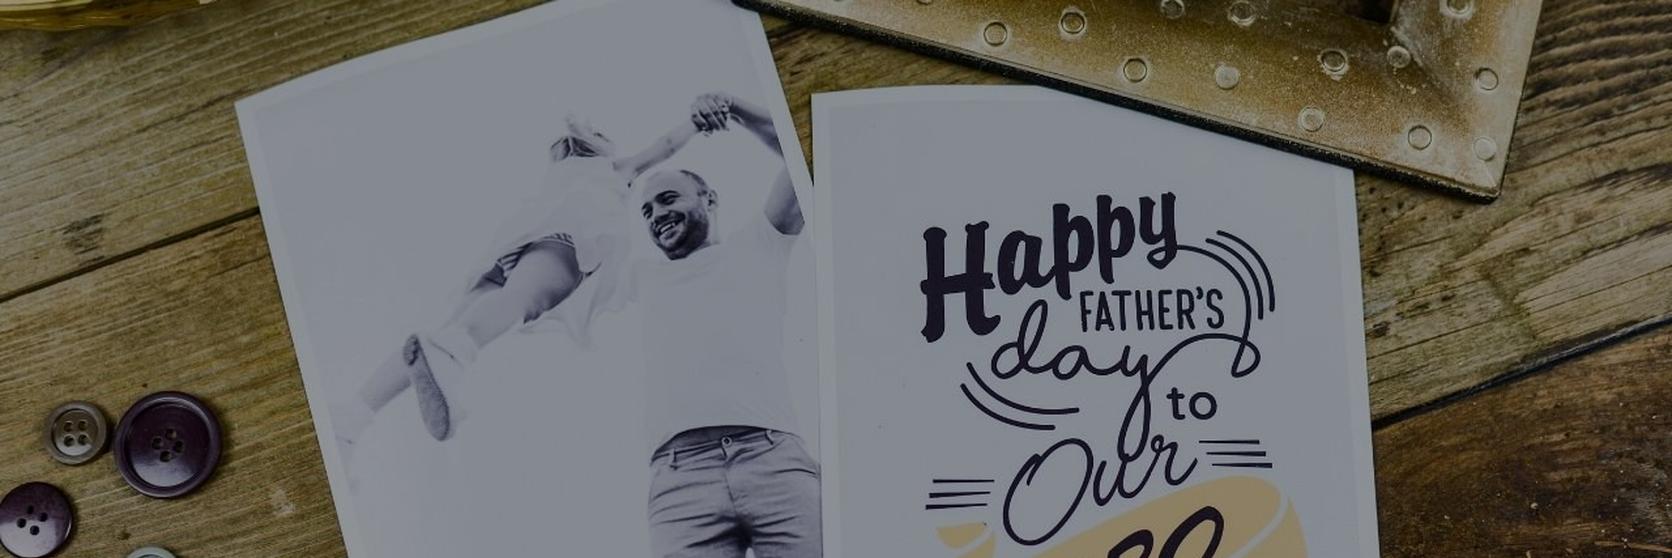 fathers-day-card-on-table